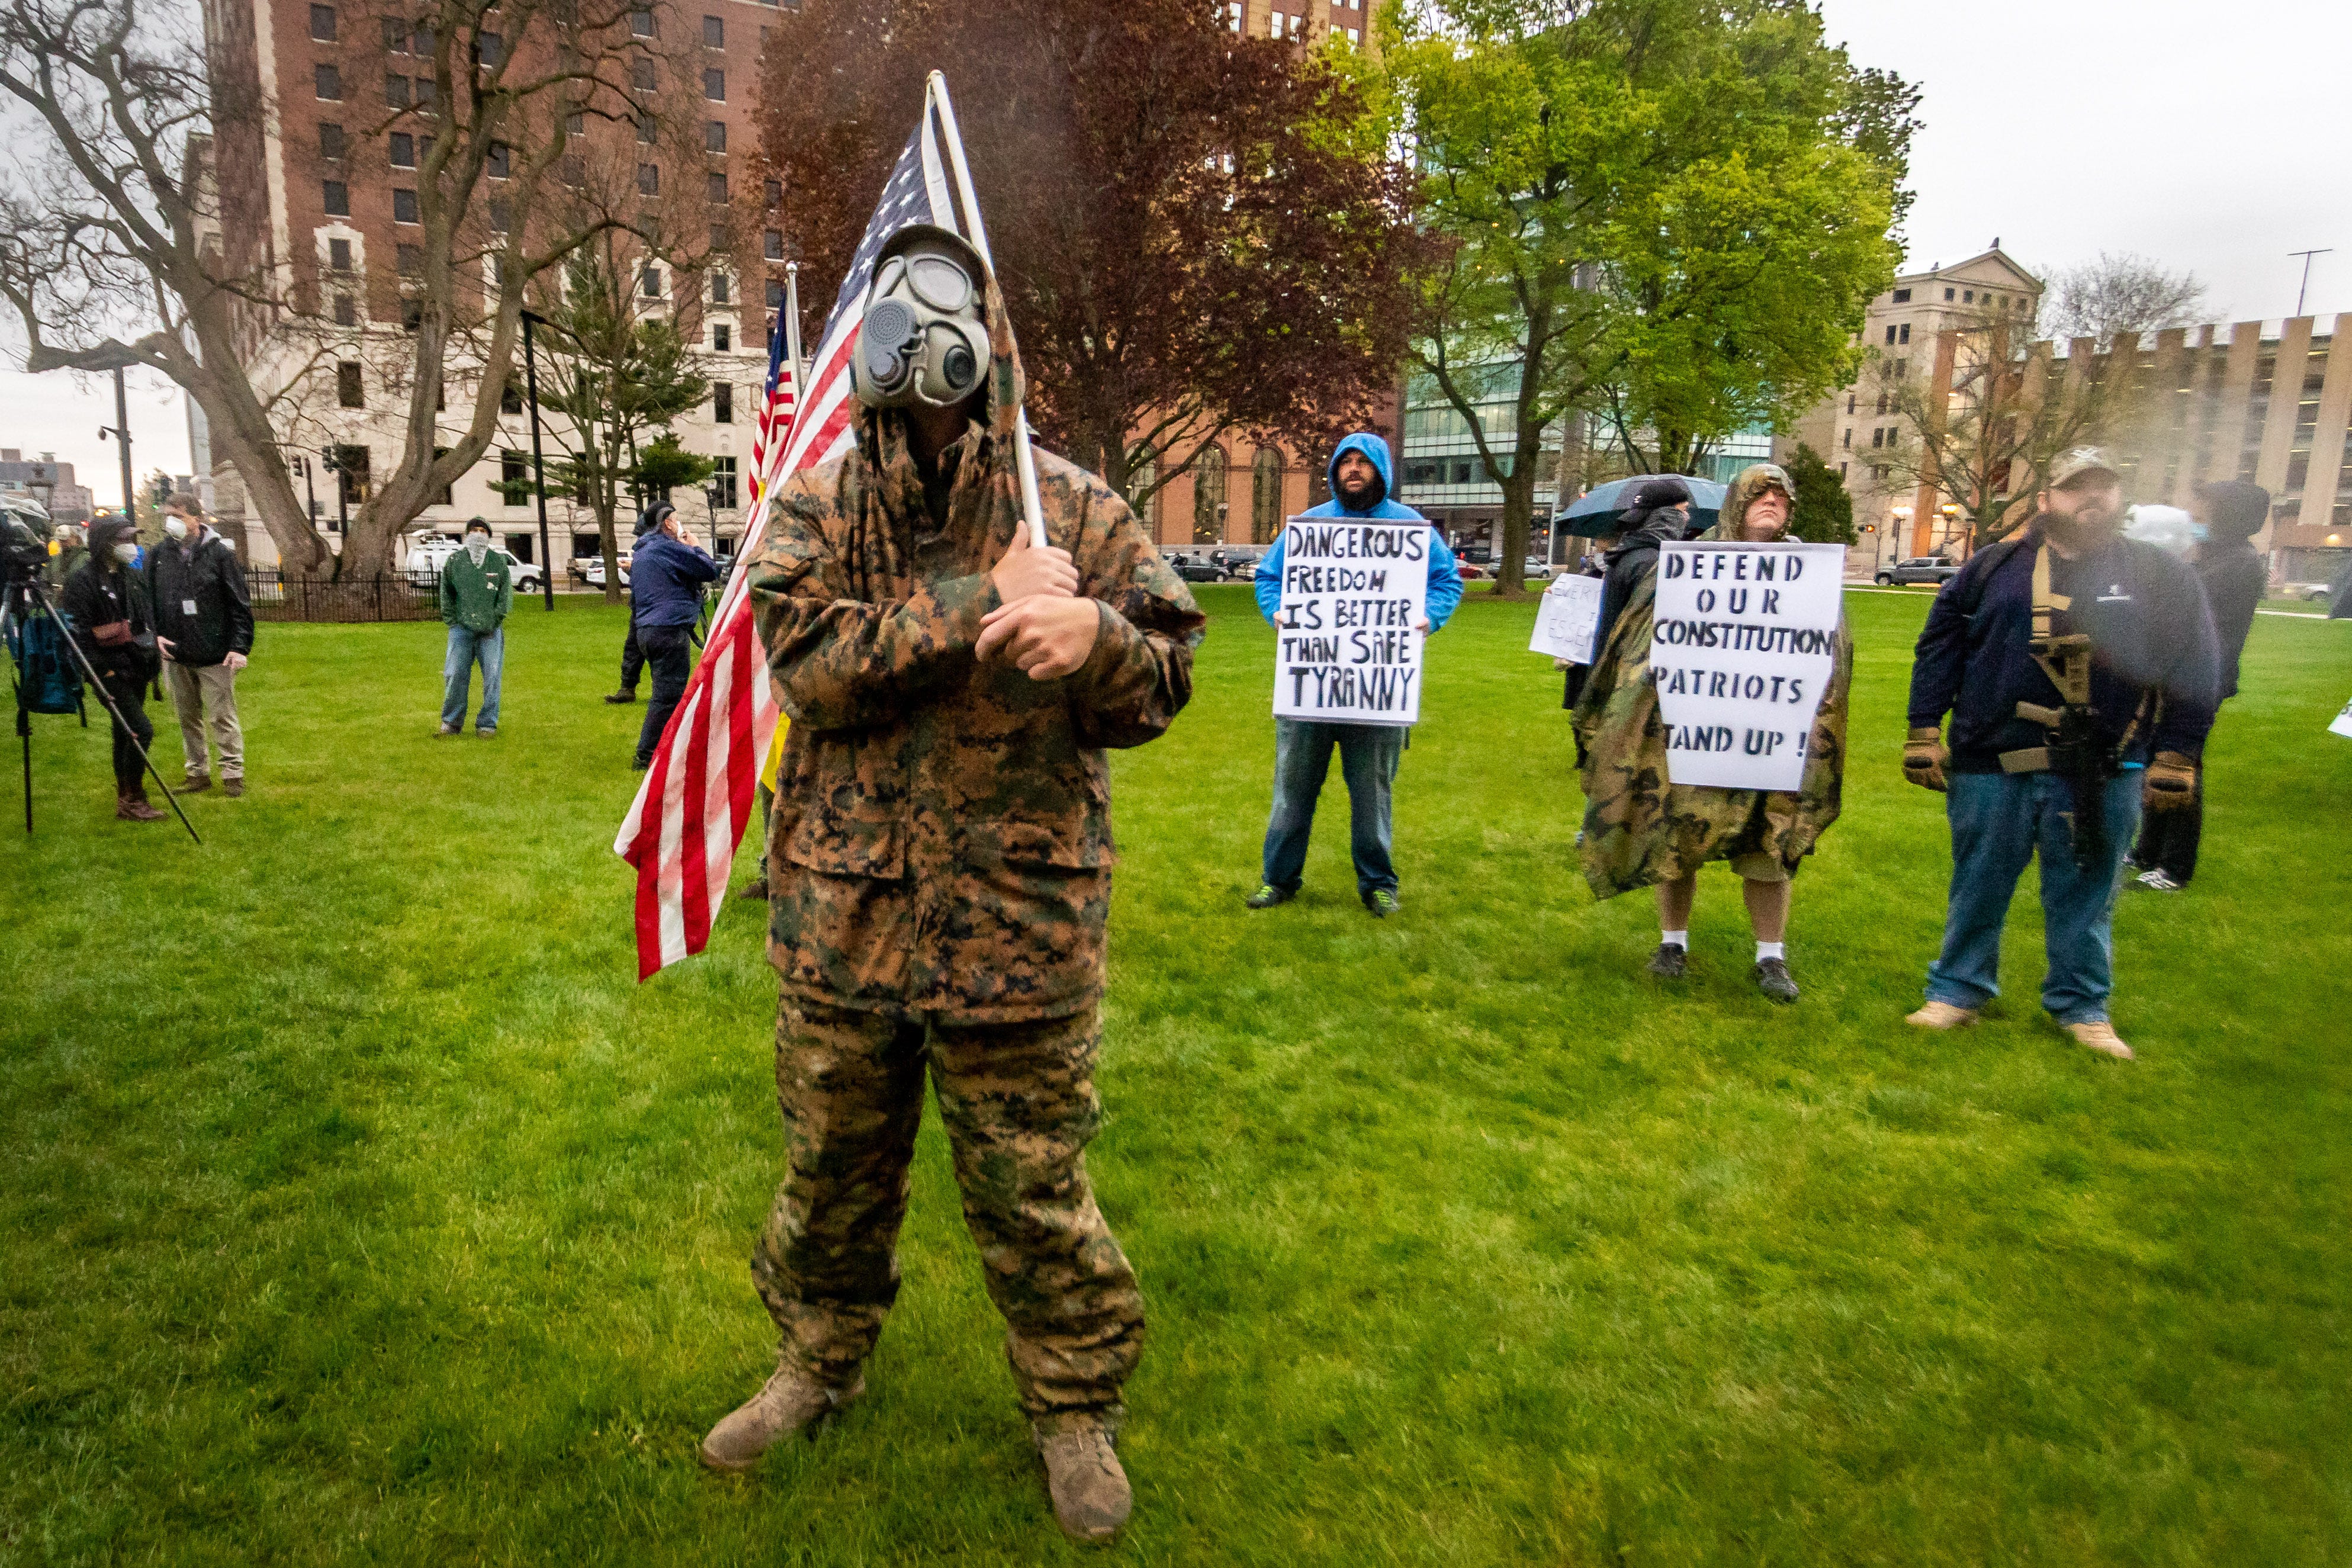 Joel Gardner from Lansing wears a gas mask at the protest.